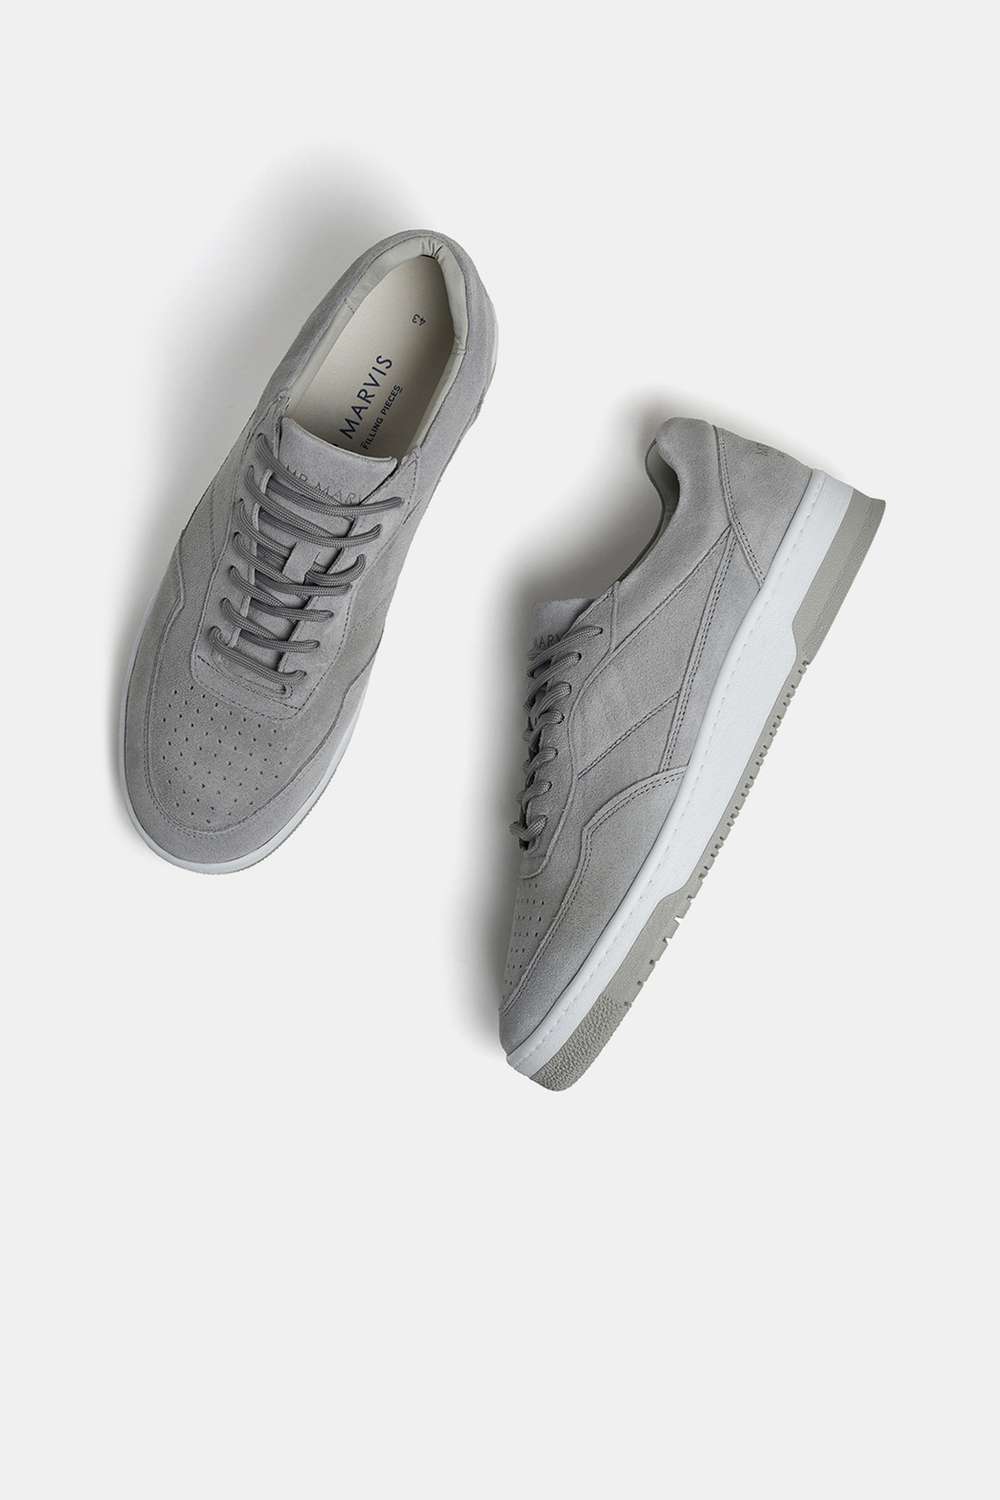 Oysters - The Suede Sneakers